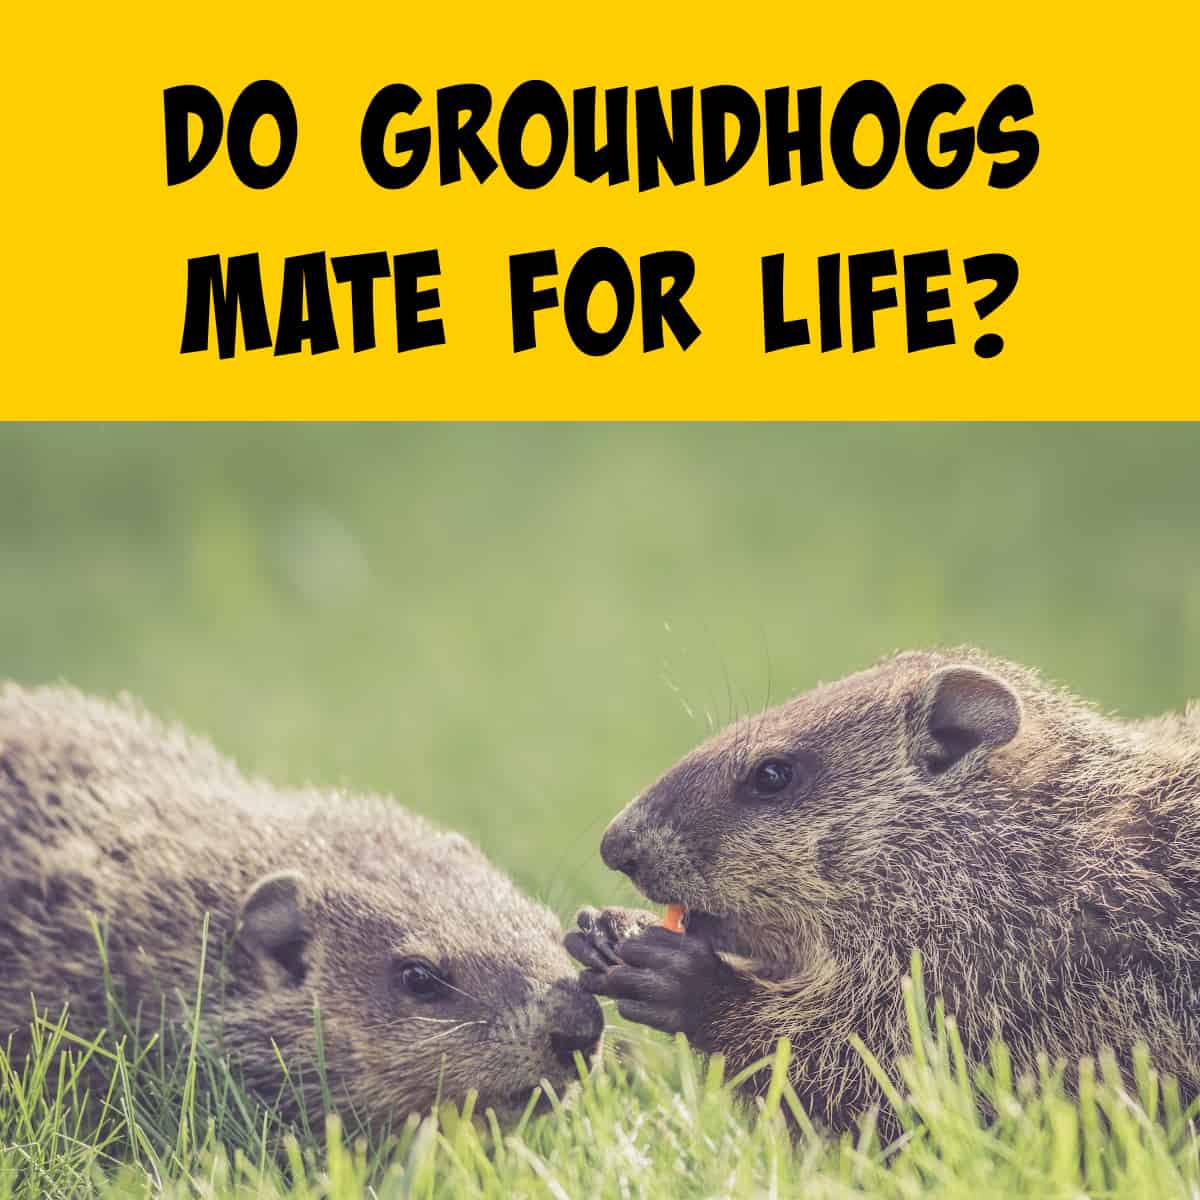 Pair of groundhogs in a field